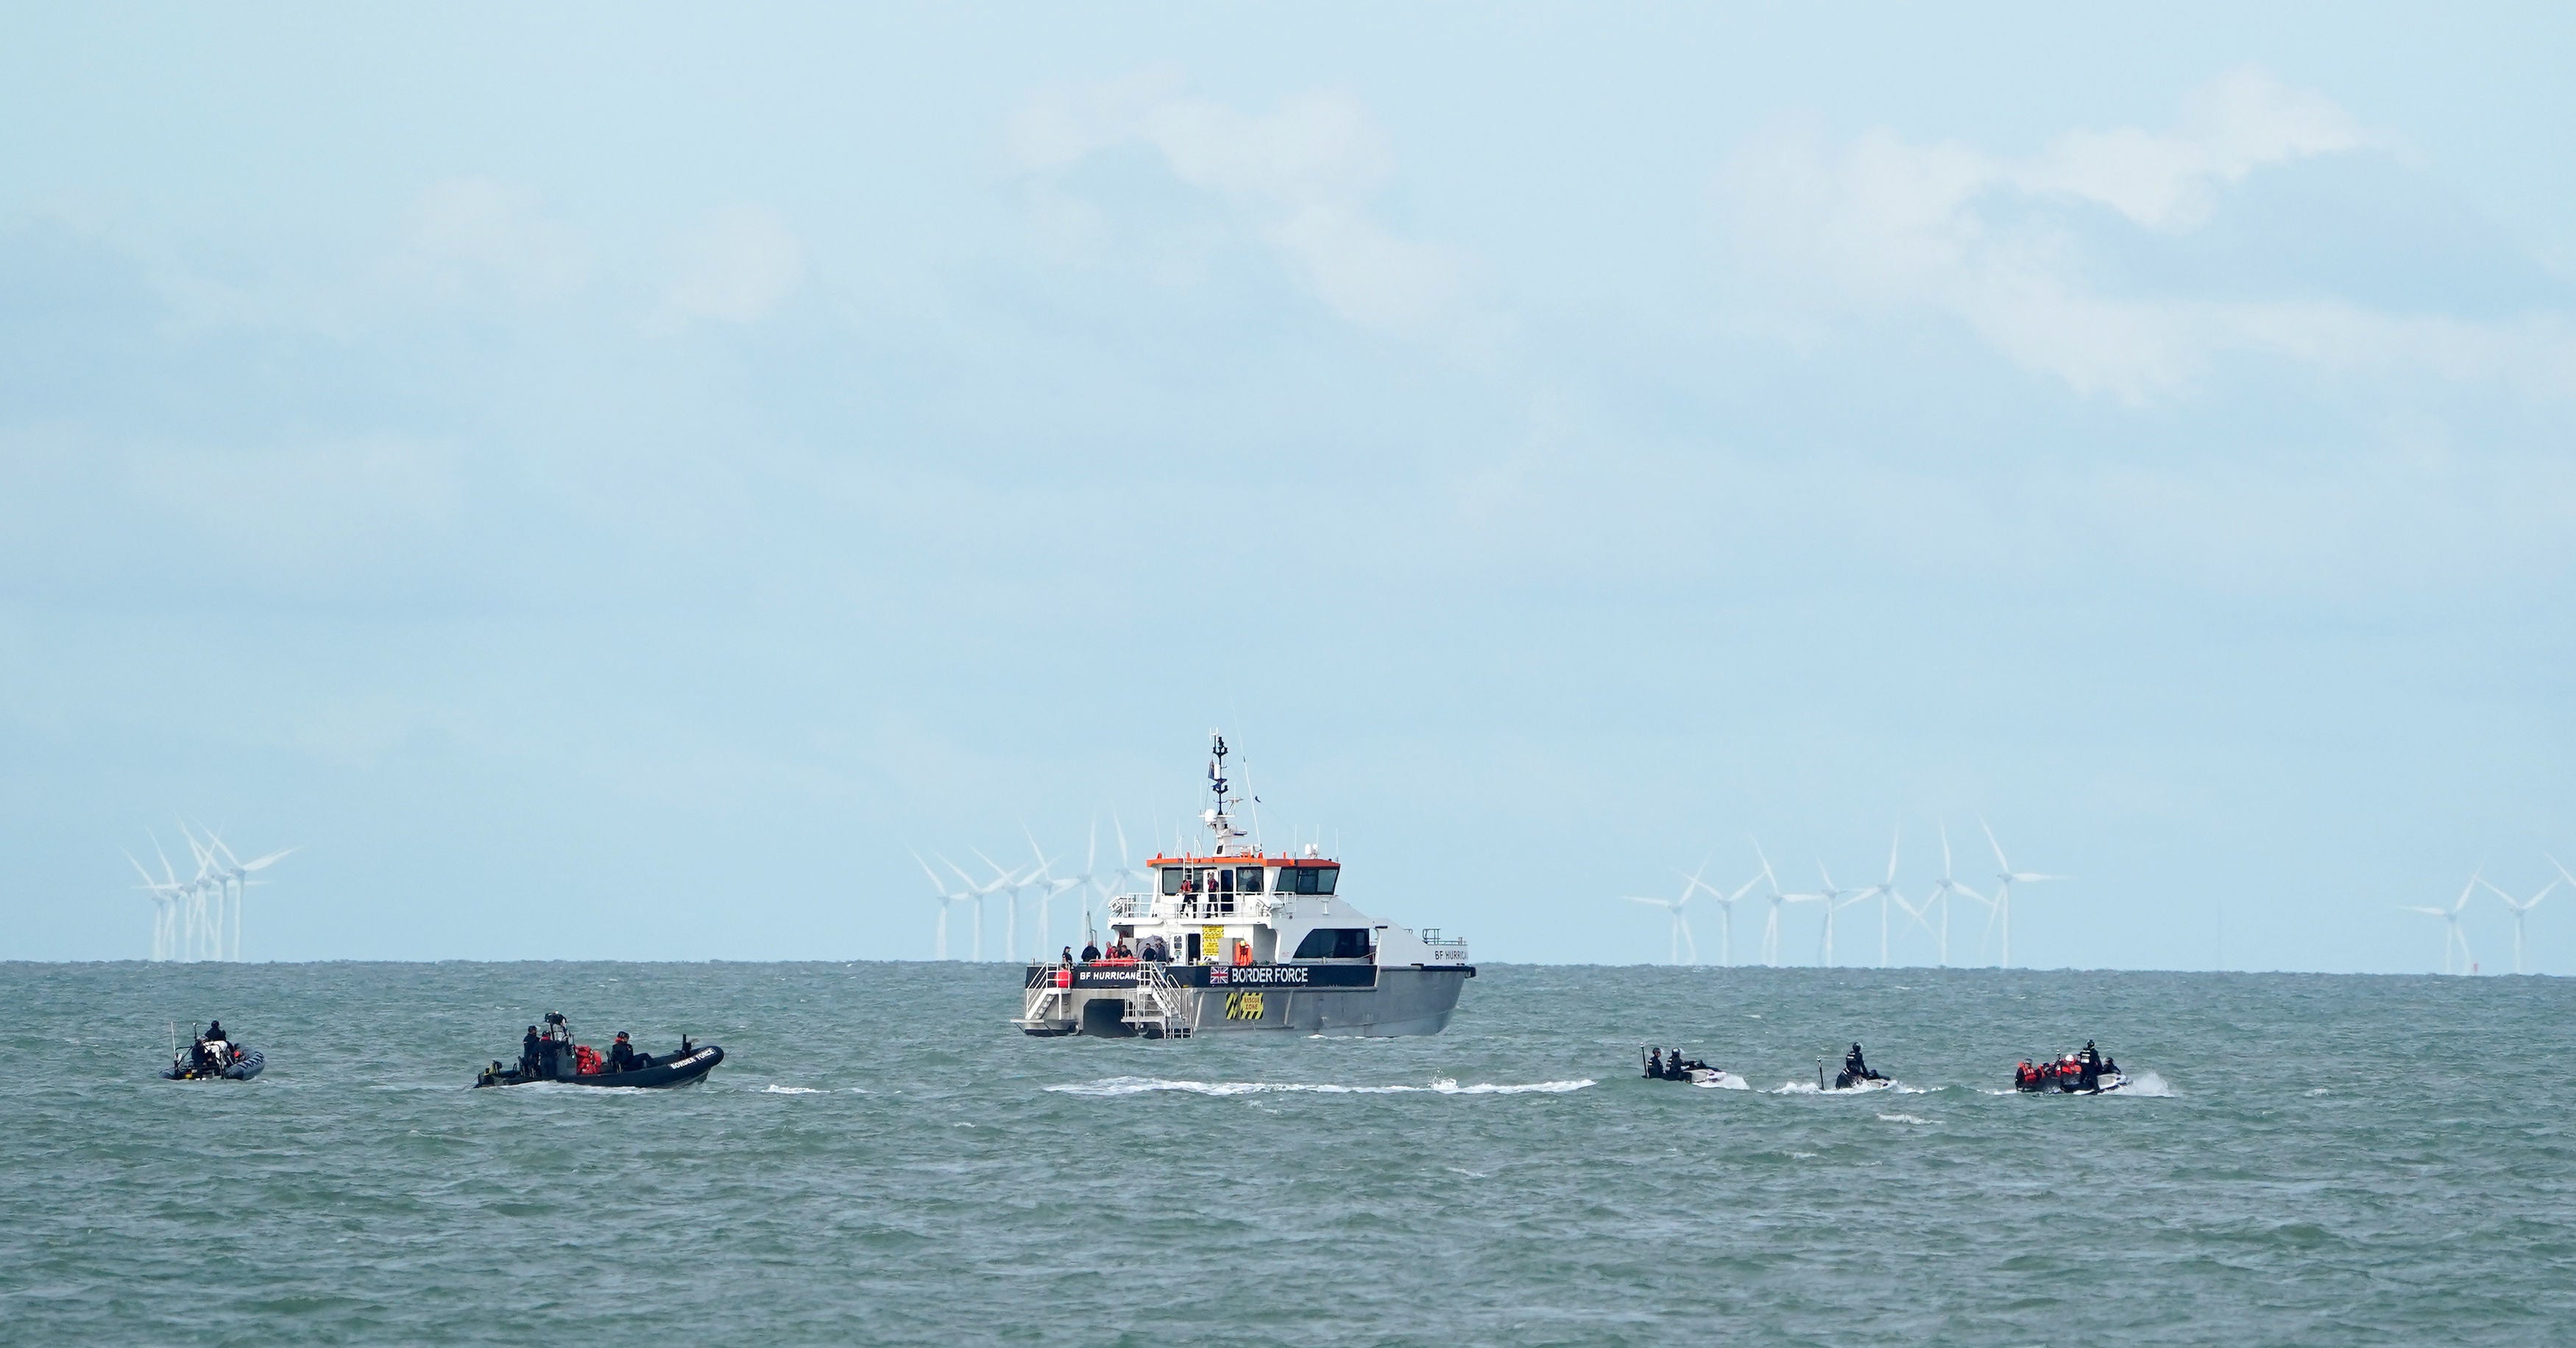 Border Force officers and vessels during an exercise to practice intercepting small boats crossing the Channel near Deal in Kent.